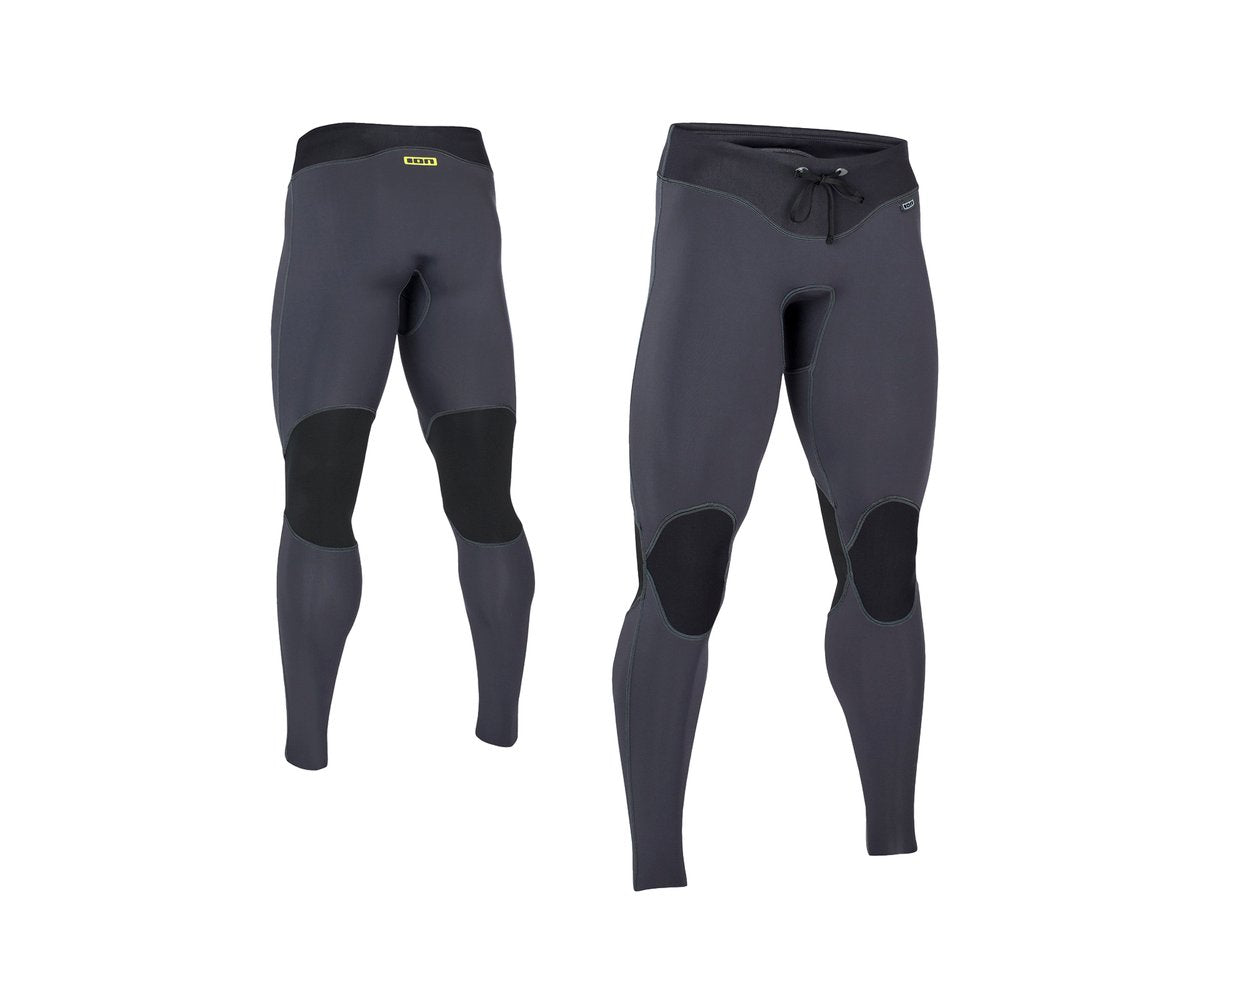 ION Neo Pants 2.0 Men 2022 - Worthing Watersports - 9008415681761 - Tops - ION Water